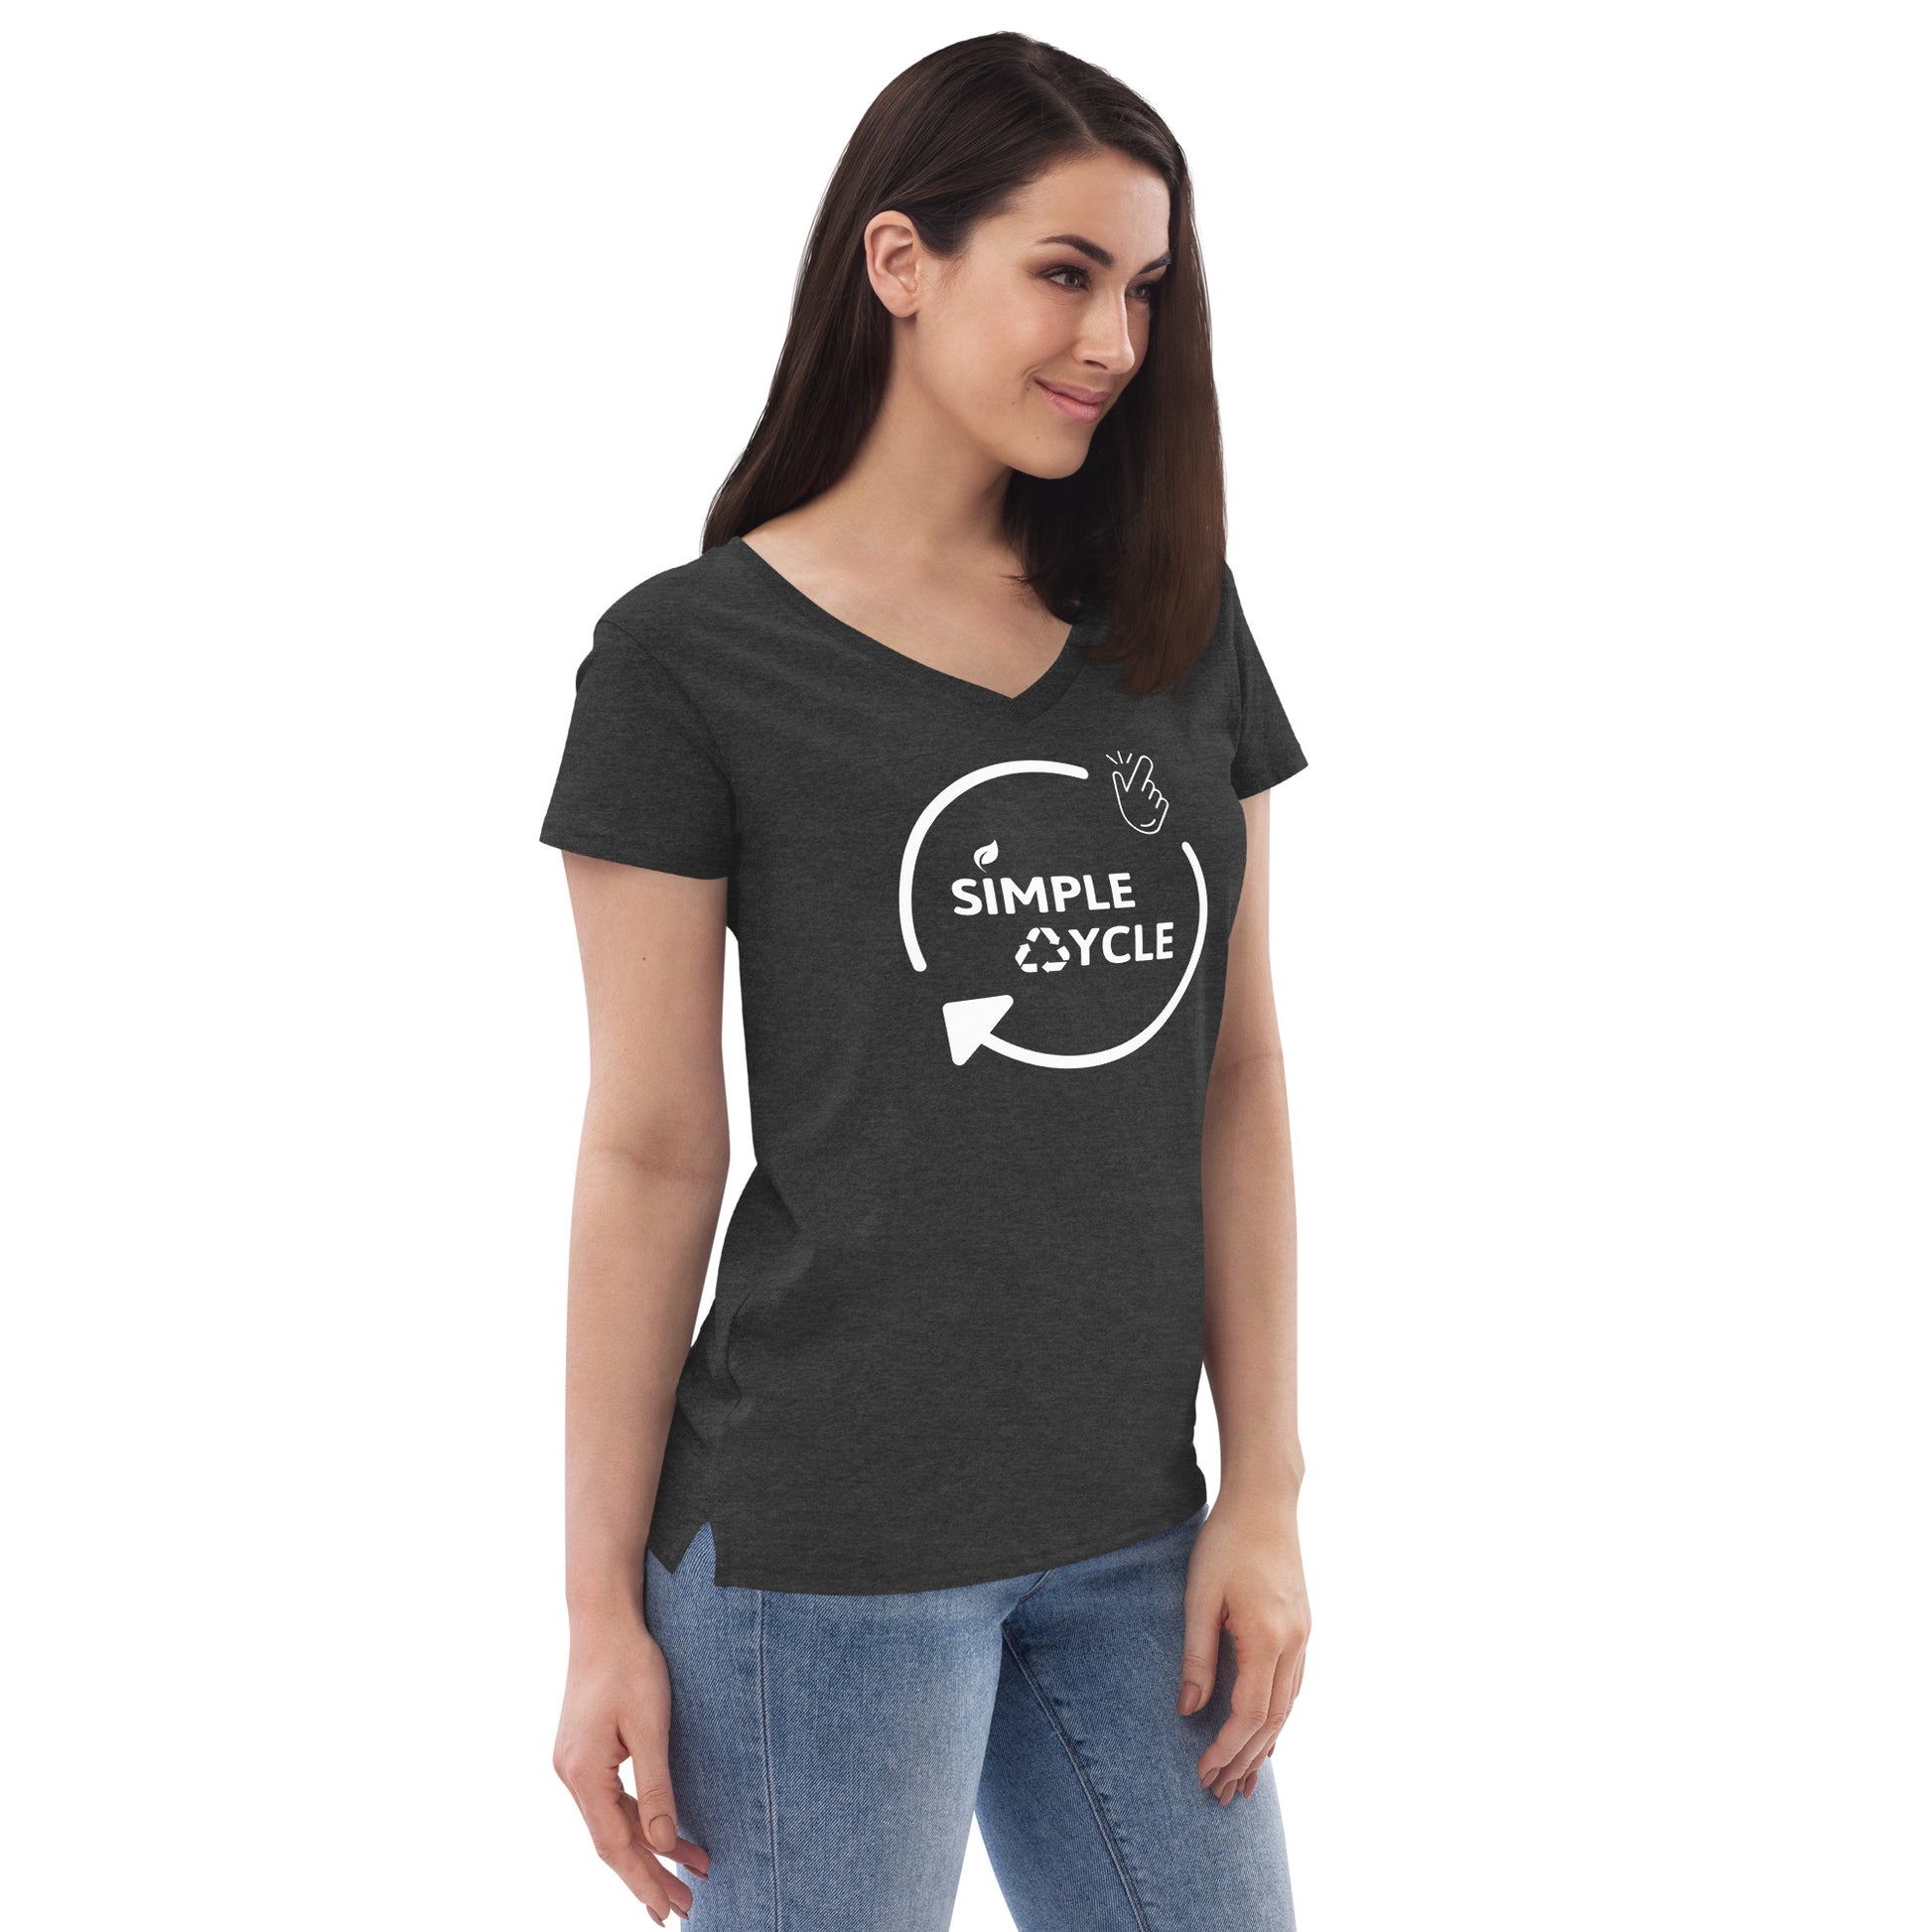 SimpleCycle Women’s Recycled V-Neck T-Shirt charcoal heather grey right front